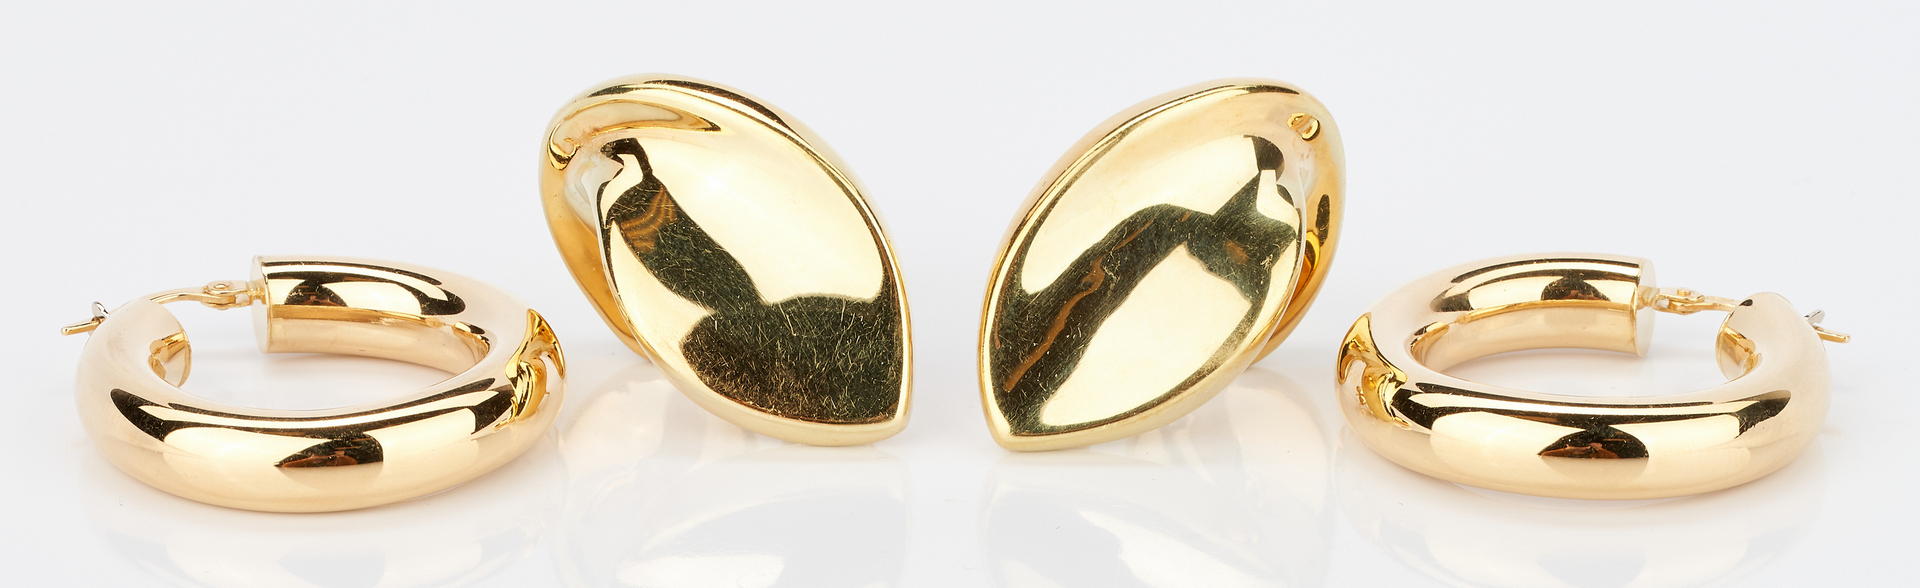 Lot 923: 2 Prs. 18K Earrings, Peter Wong and Unoaerre